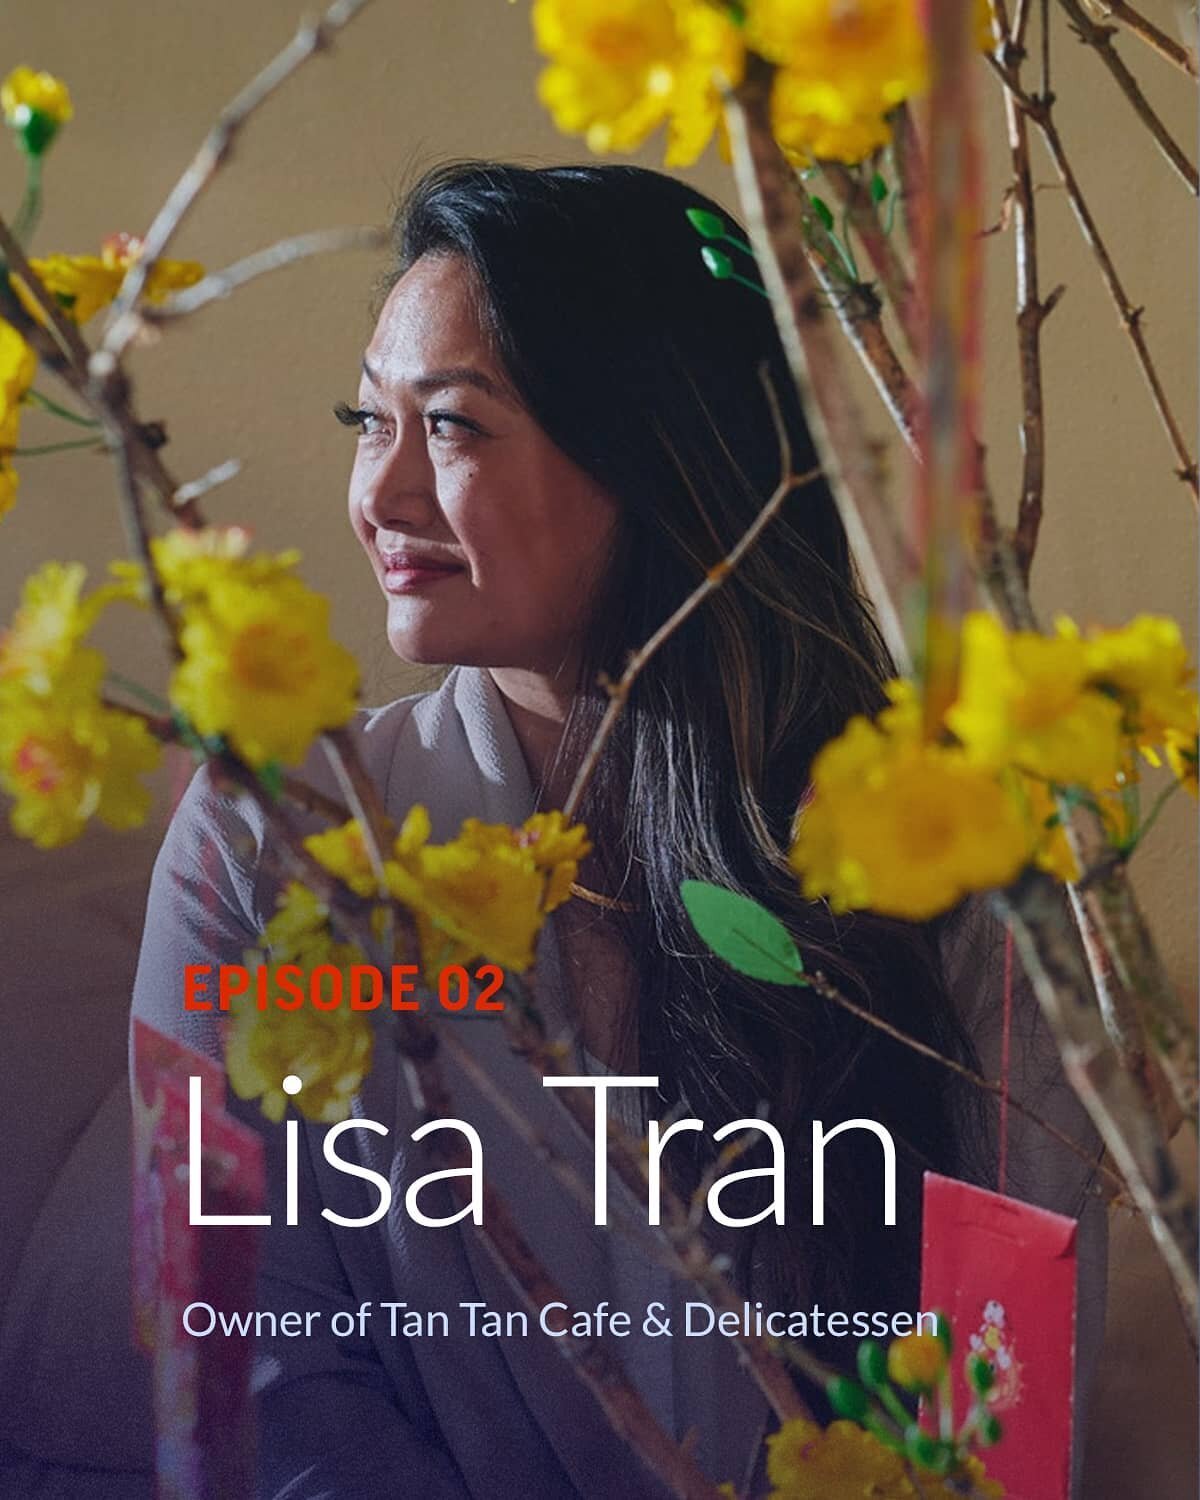 Meet our friend Lisa Tran. She's the force behind the success of @tantanfoods Vietnamese Hoisin Sauce and other delicious products. 

Tune in and inspire!

Follow us and subscribe to our podcast. 

Leave us feedback in comments. 

🐅🐅🐅💃💃💃💥💥💥?